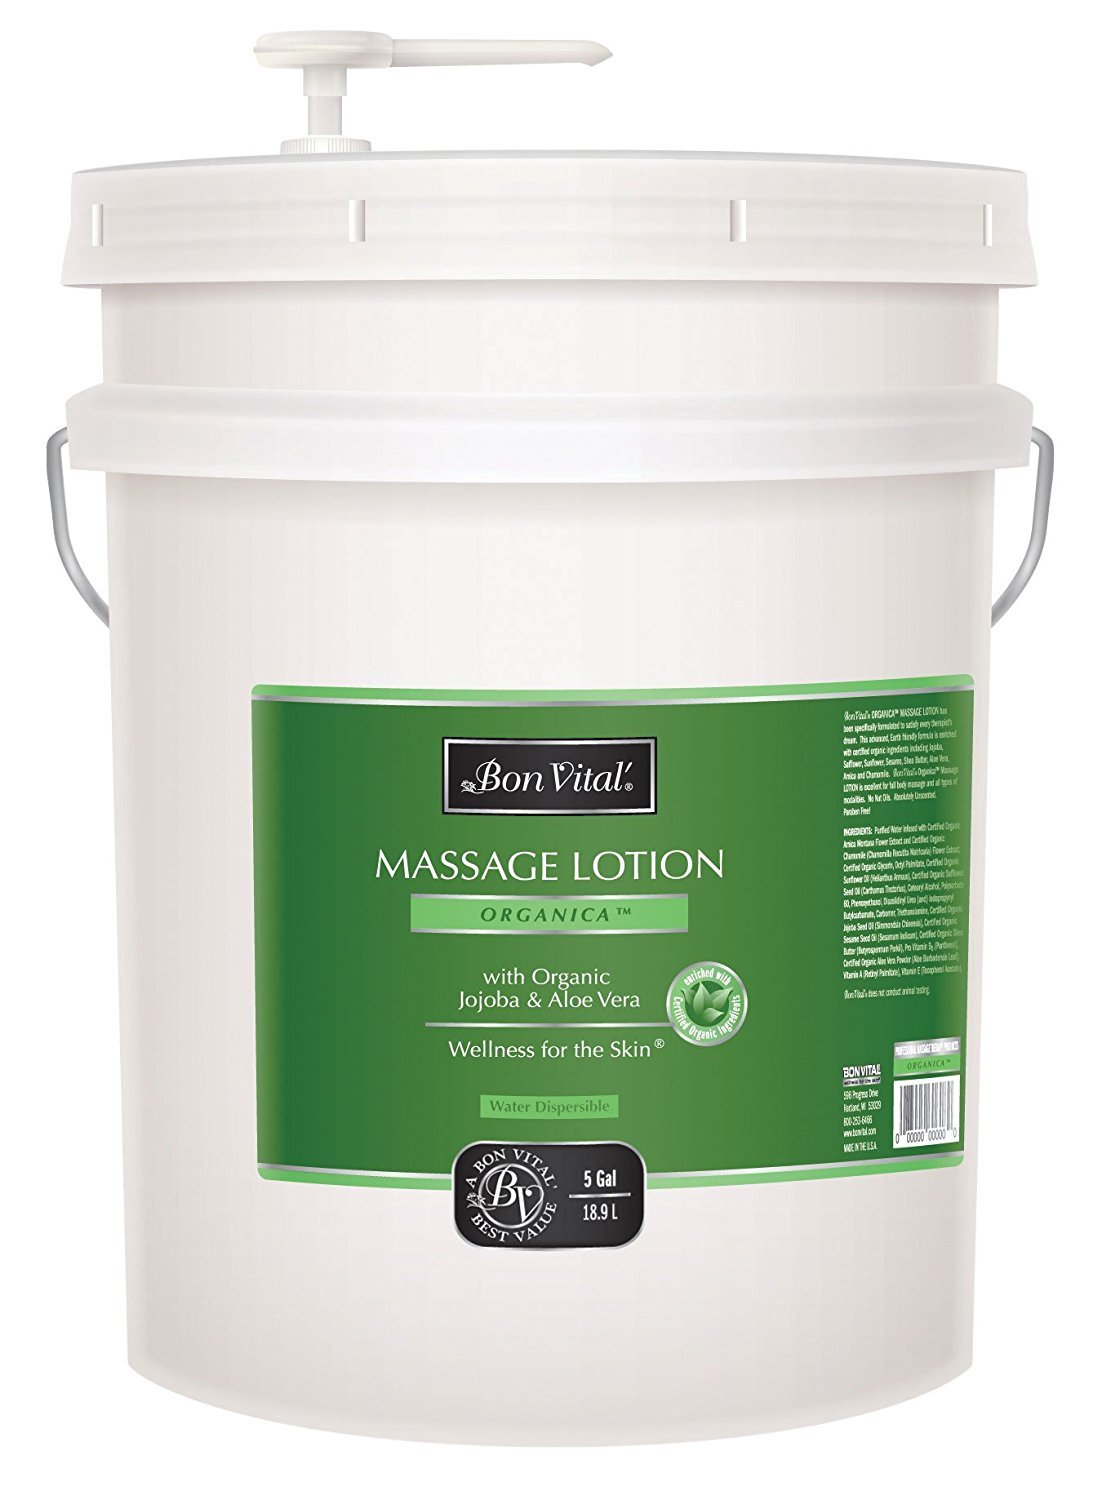 Bon Vital' Organica Massage Lotion Made with Certified Organic Ingredients for an Earth-Friendly & Relaxing Massage, Natural Moisturizer Perfect Lotion for Relaxing Back & Neck Massages, 5 Gallon Pail